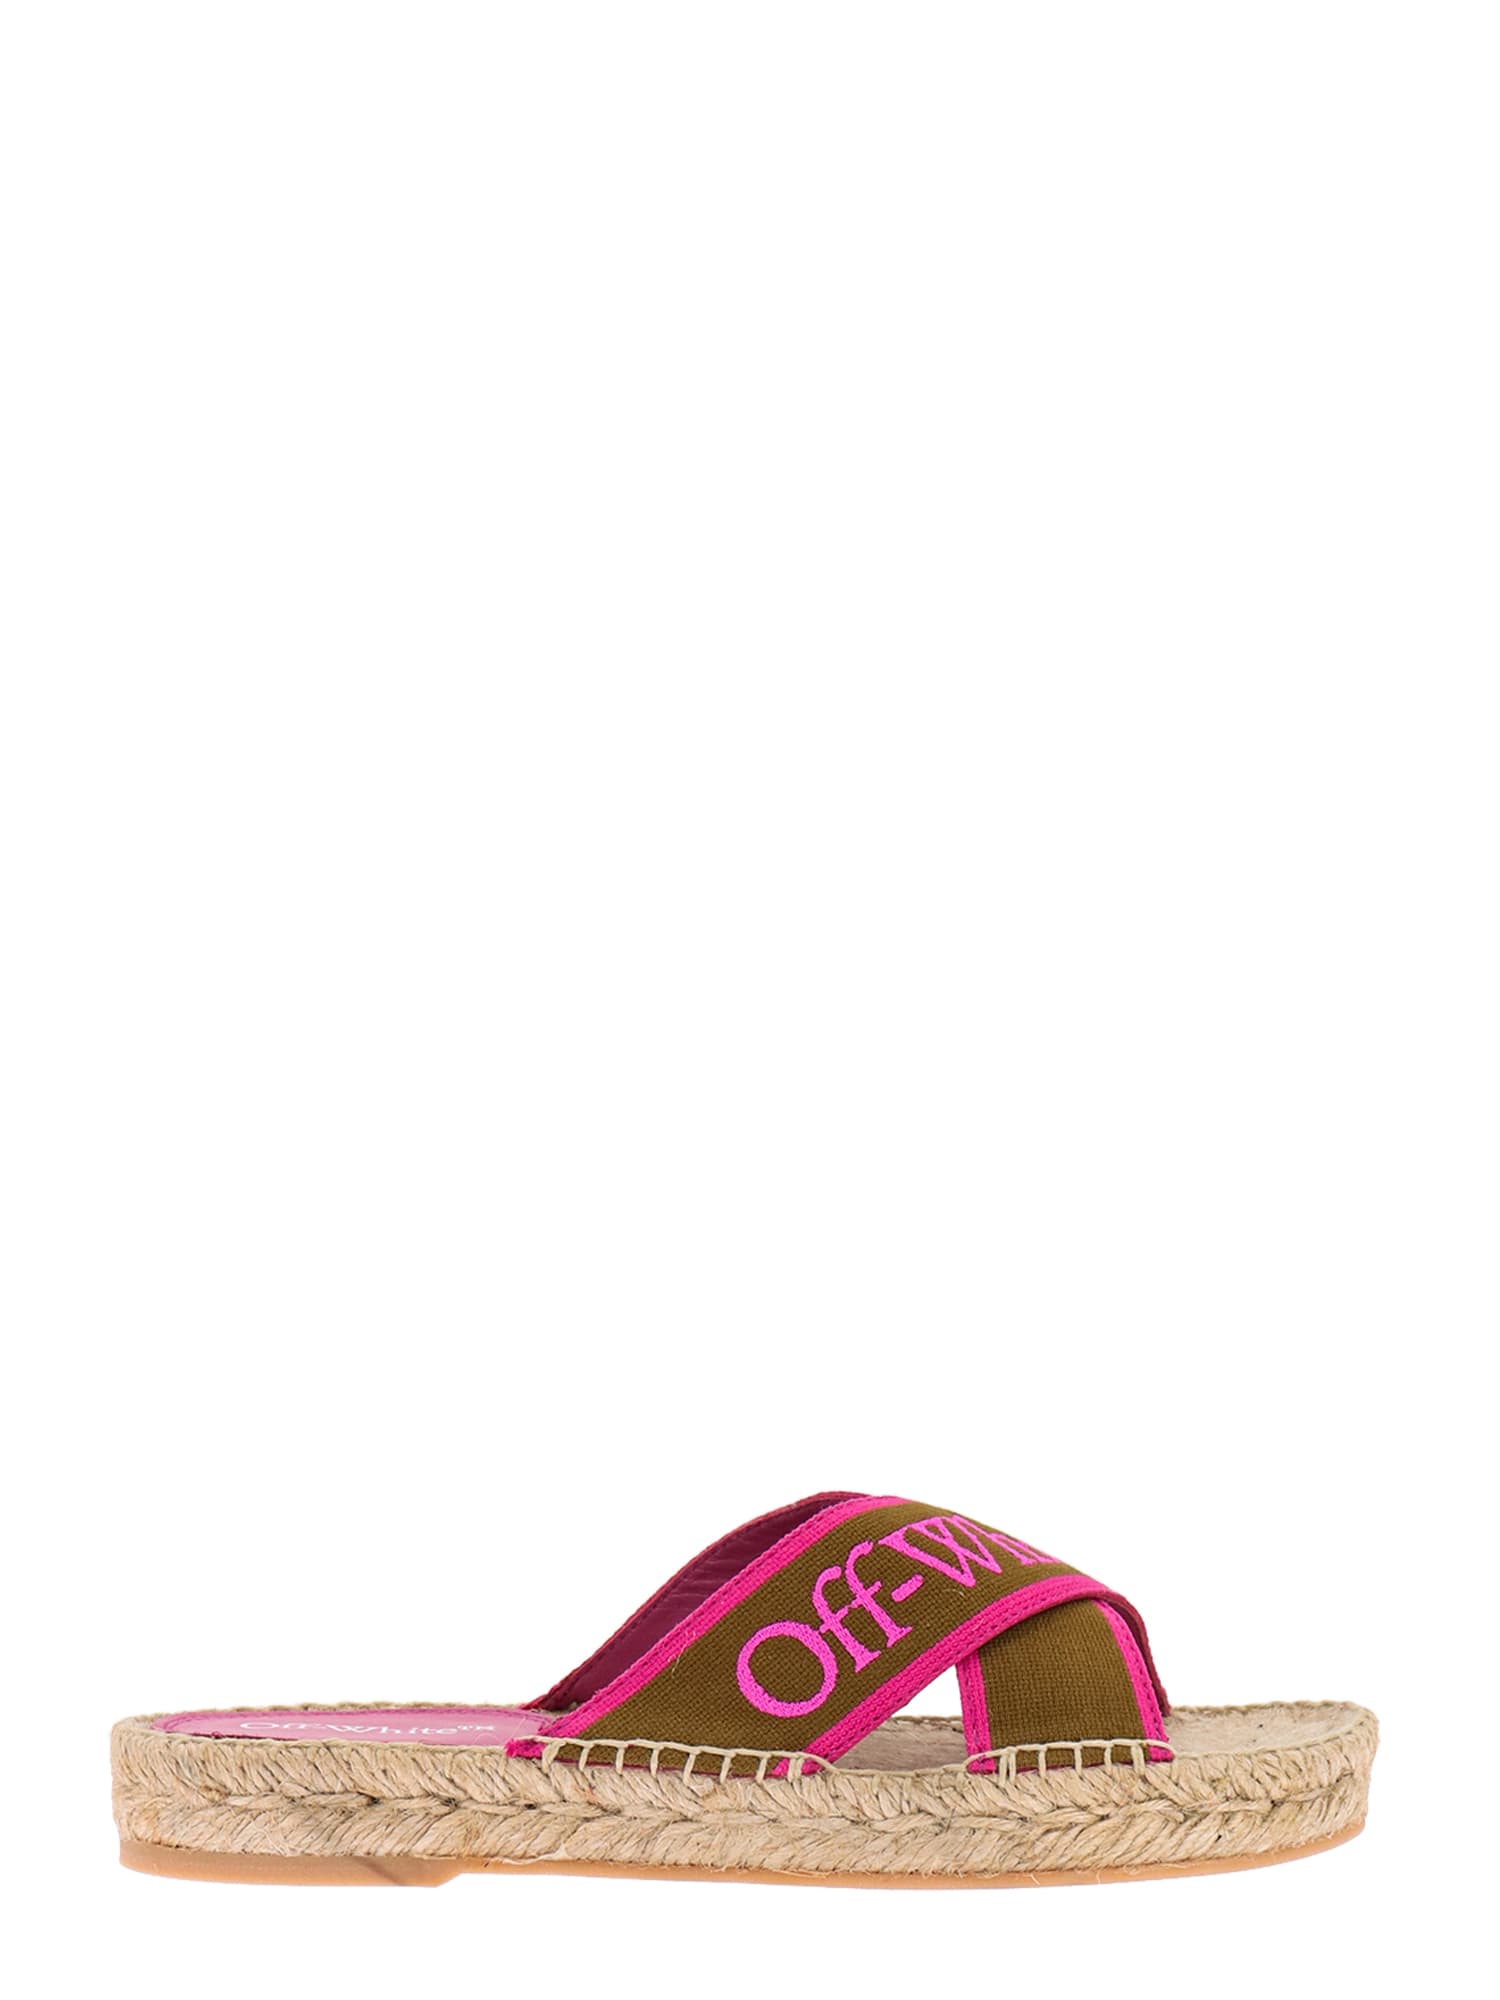 Off-White Bookish Criss Cross Sandals